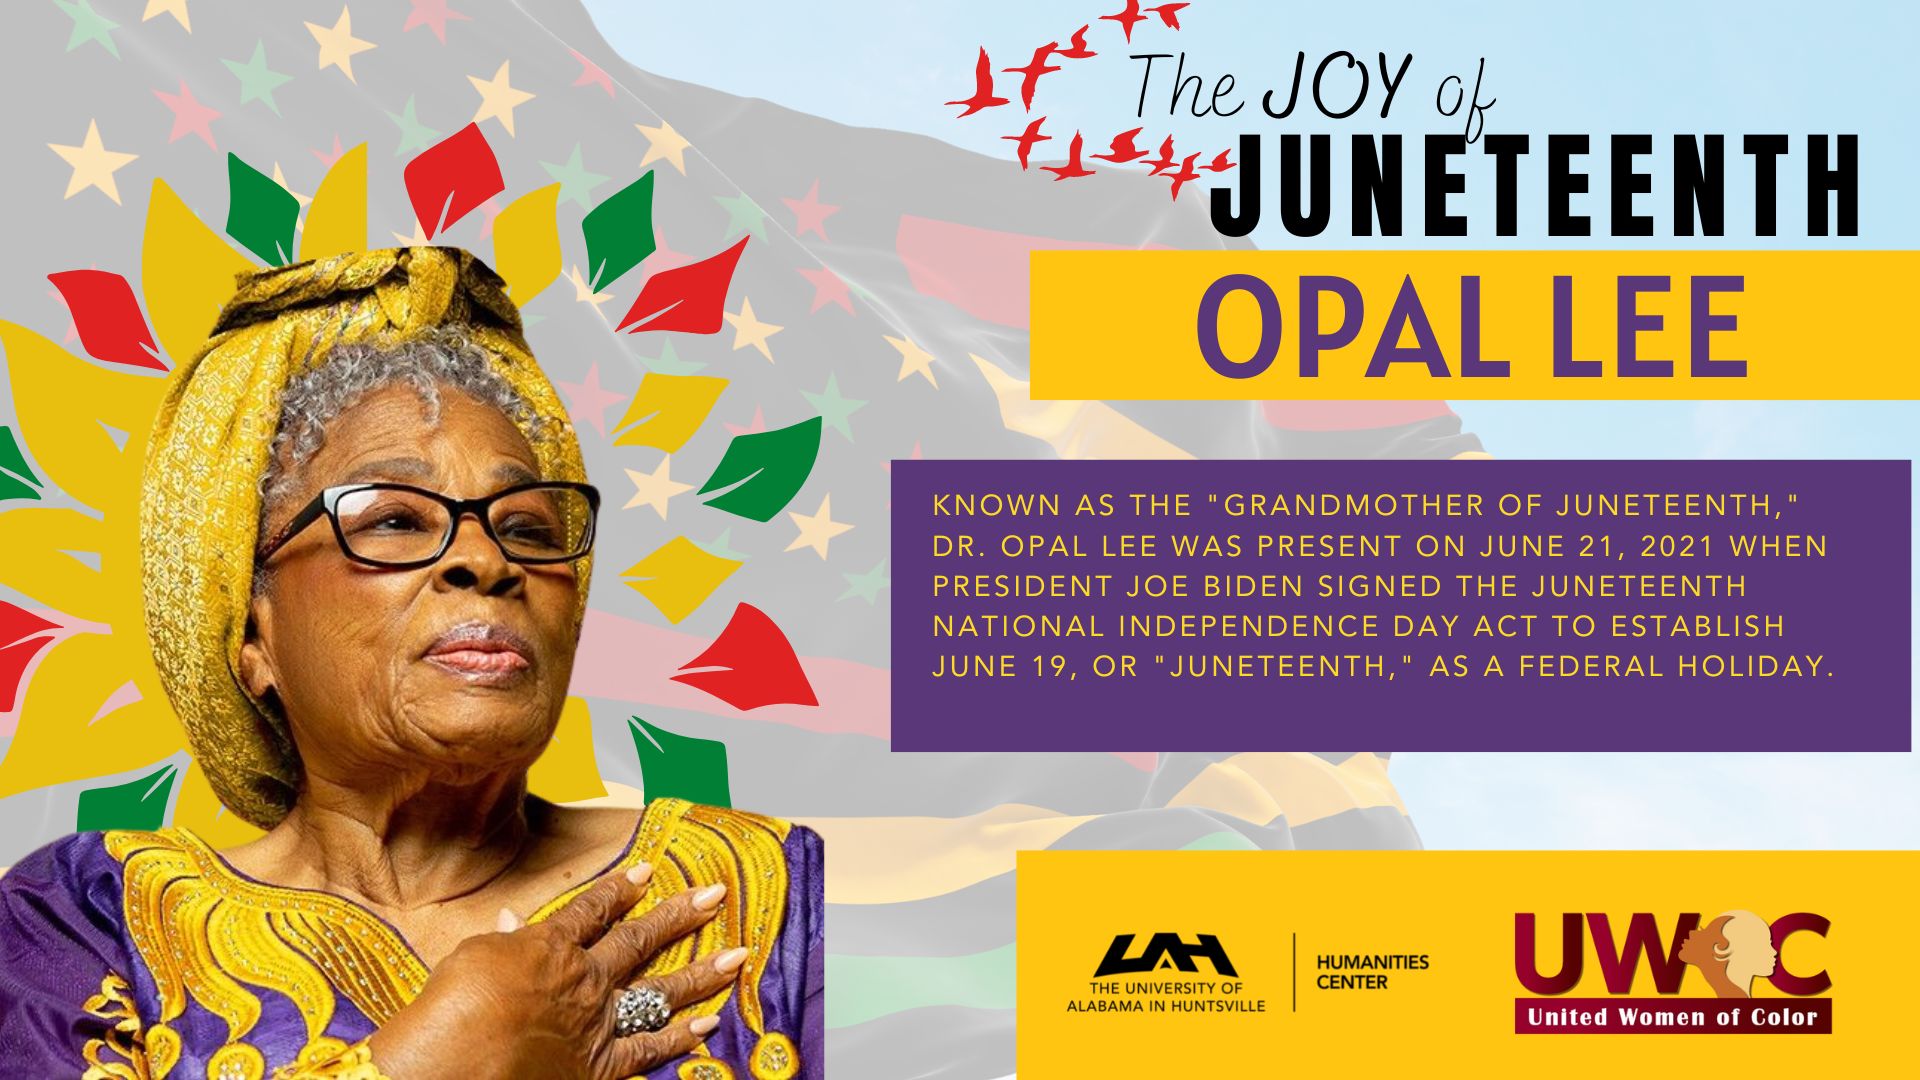 UAH to host The Joy of Juneteenth with Dr. Opal Lee August 28 & 29, 2022 ?>